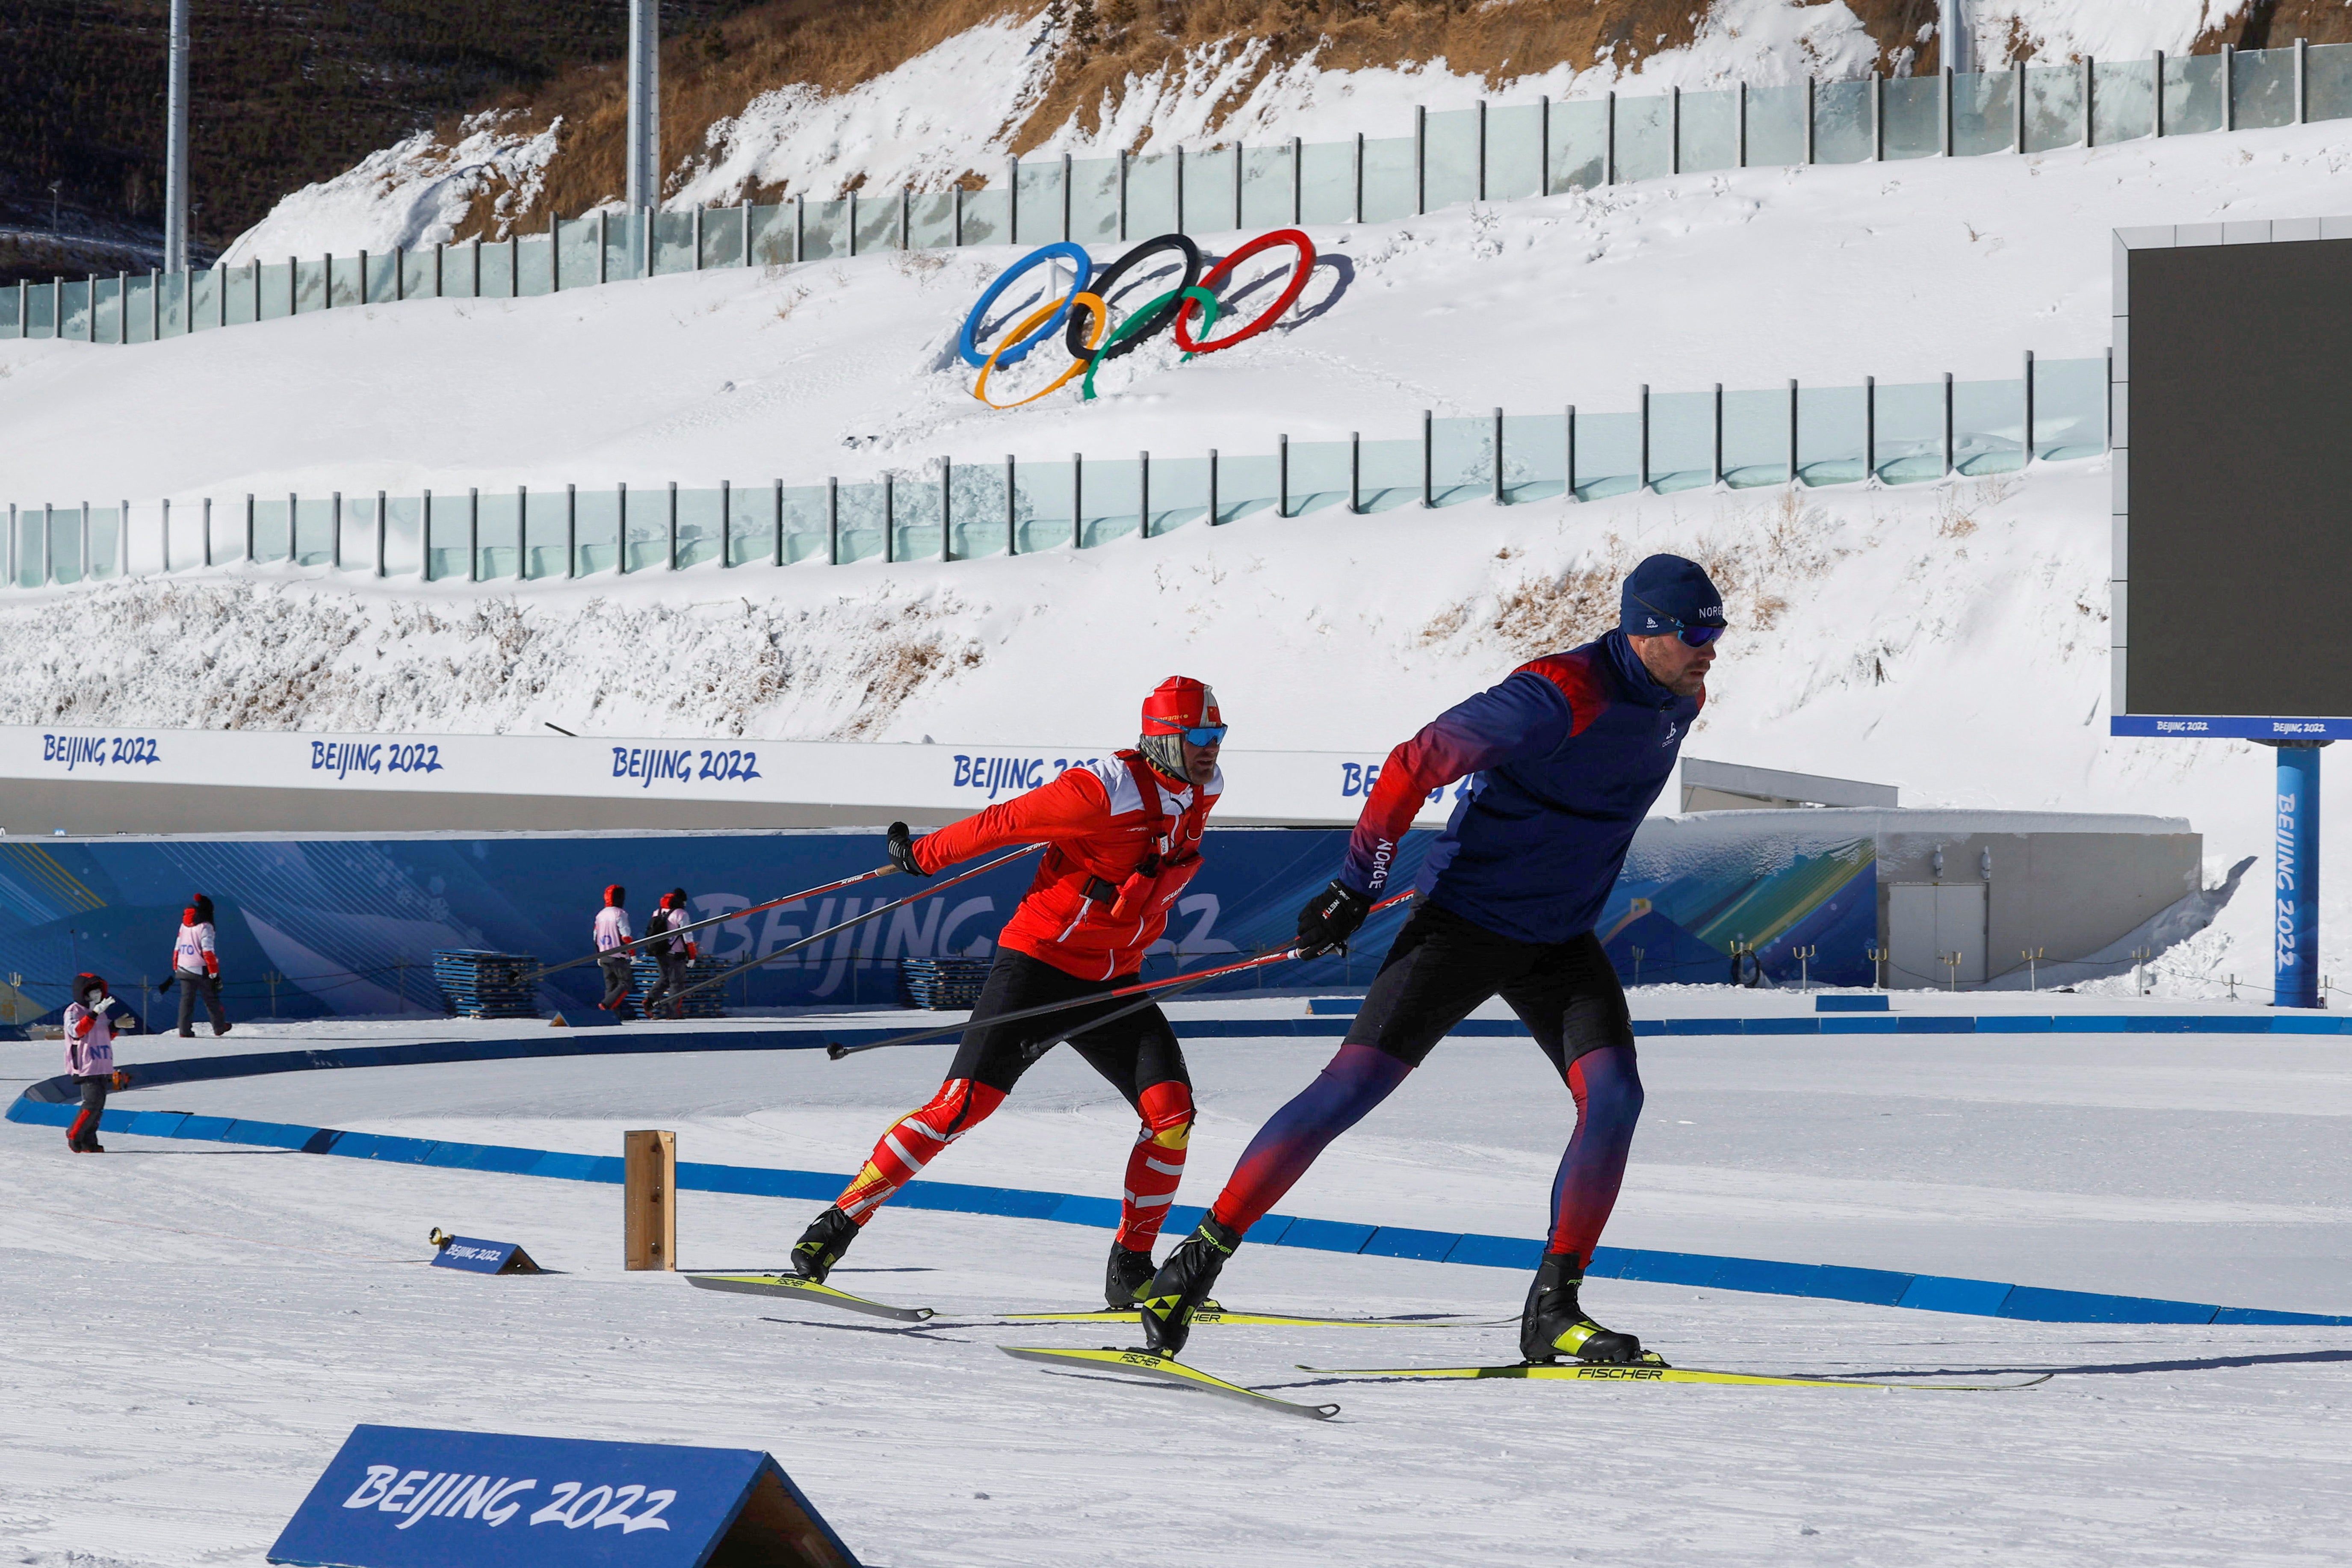 An athlete and his coach train at the National Biathlon Centre, ahead of the Winter Olympics